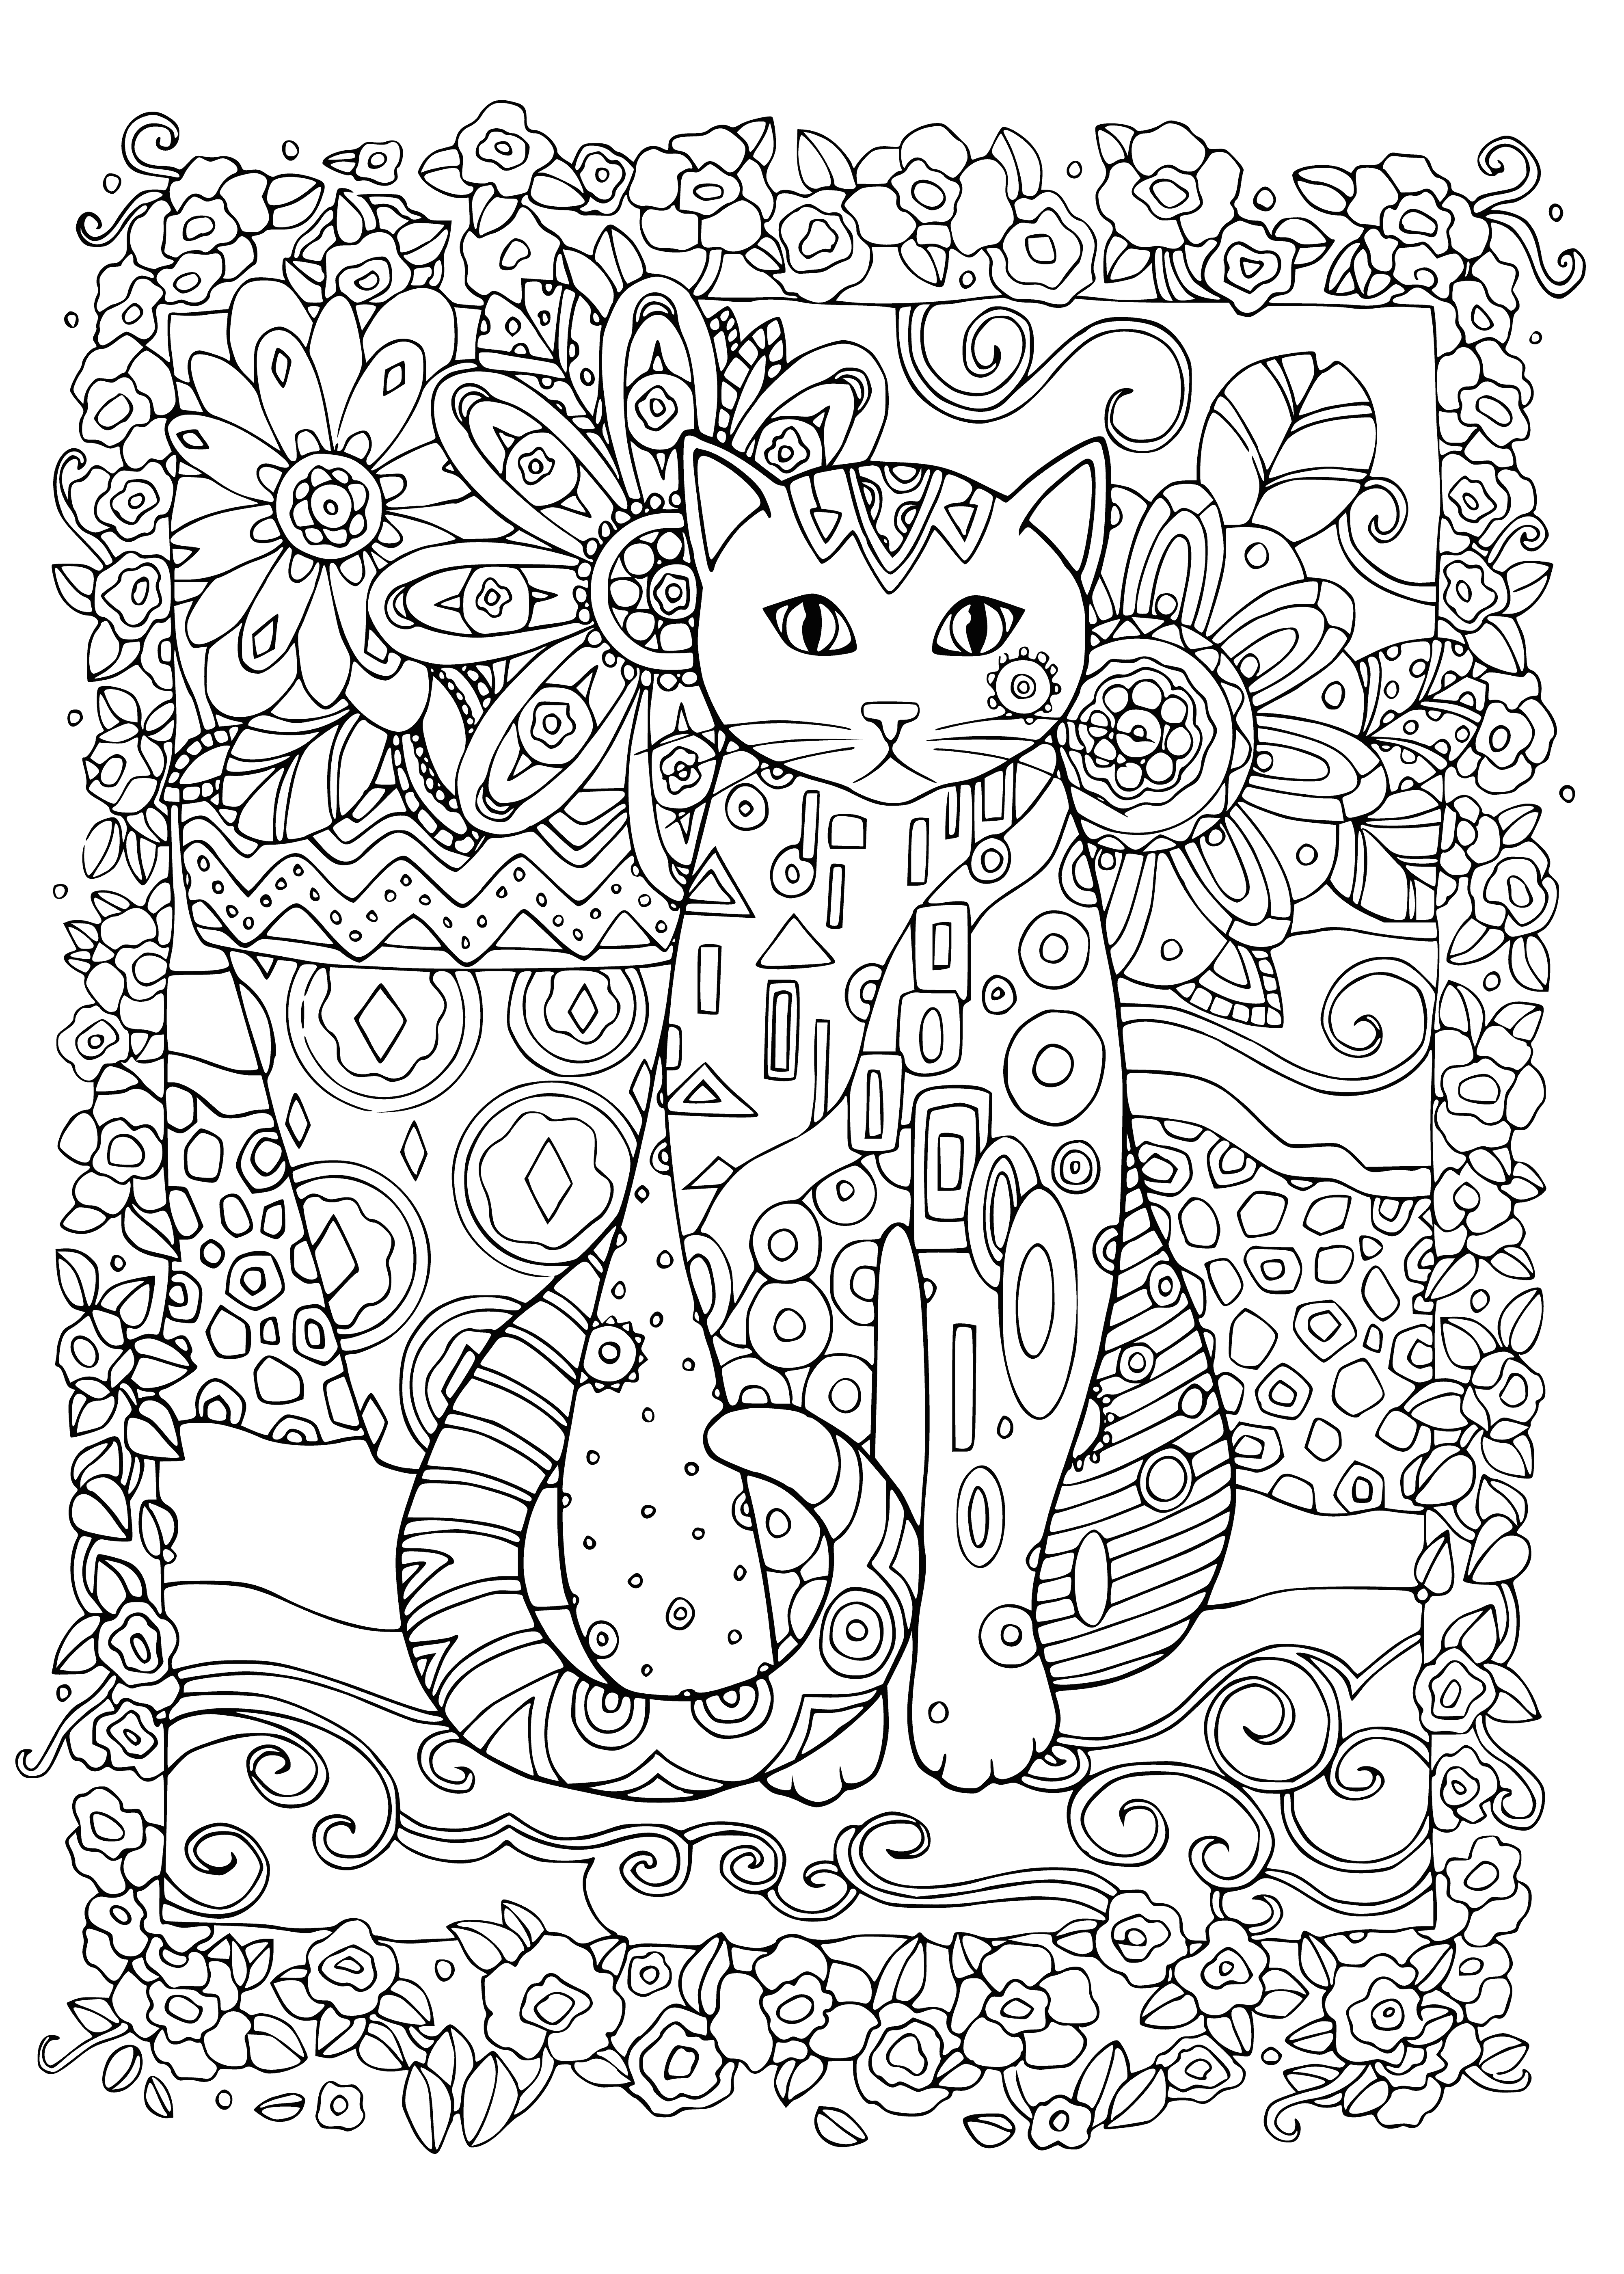 Flower garden coloring page